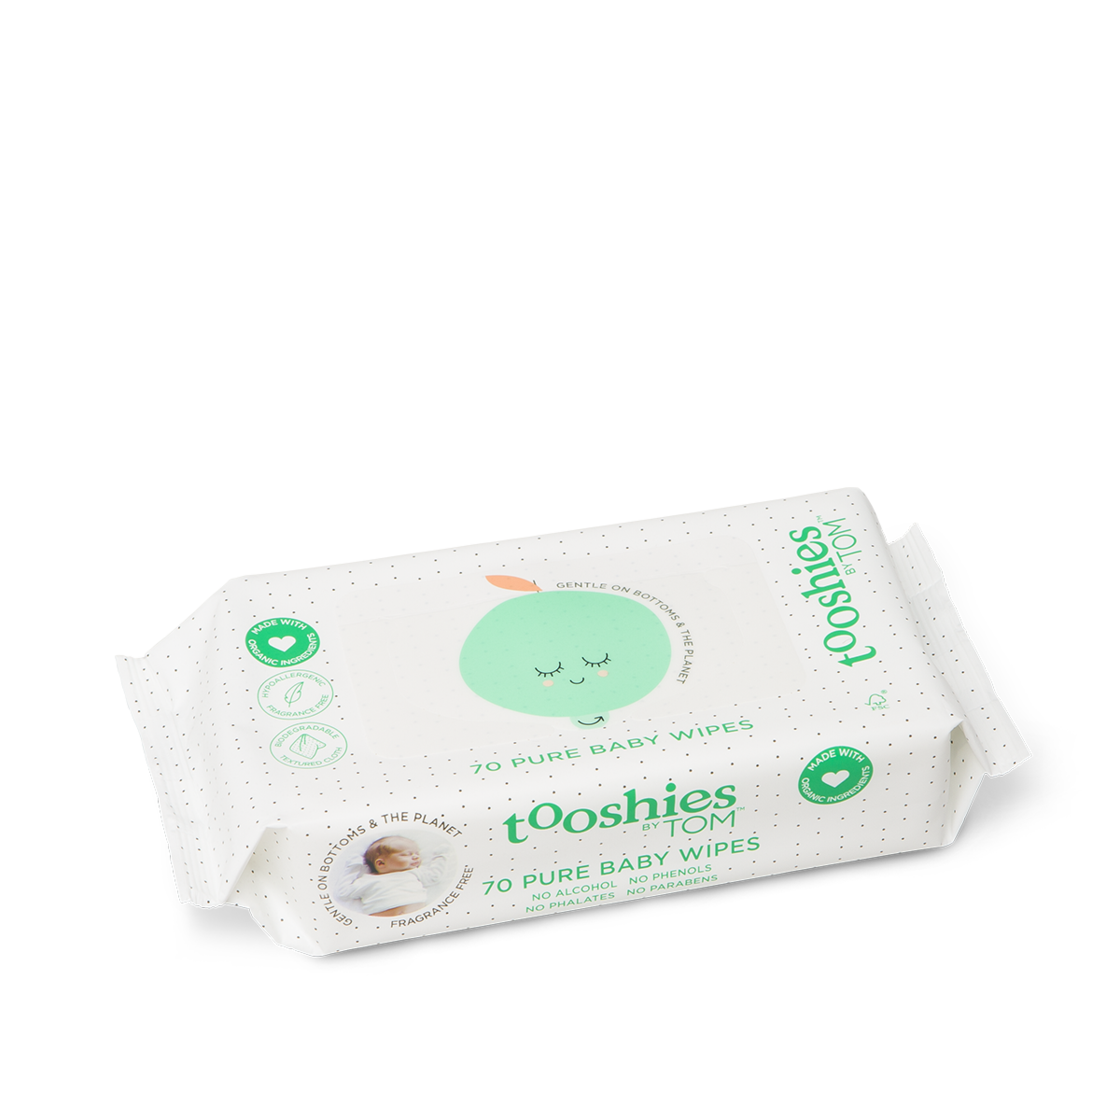 Eco Wipes – Pure Baby Wipes. 70pcs by Tooshies by TOM